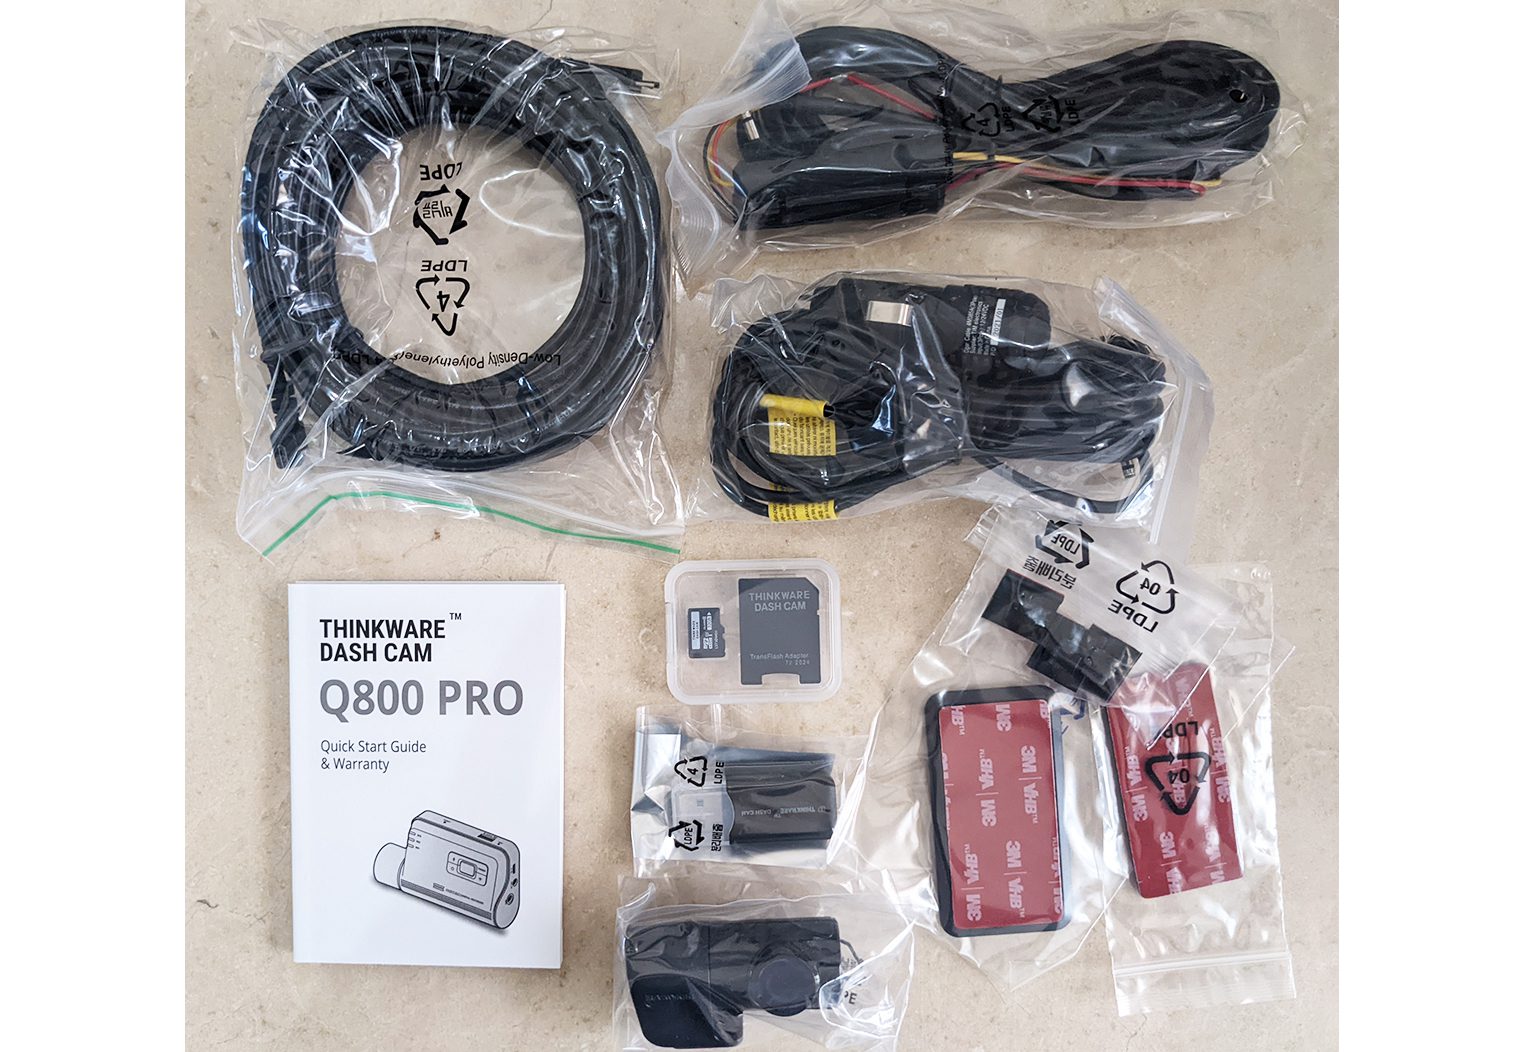 Thinkware Q800 PRO contents in the box